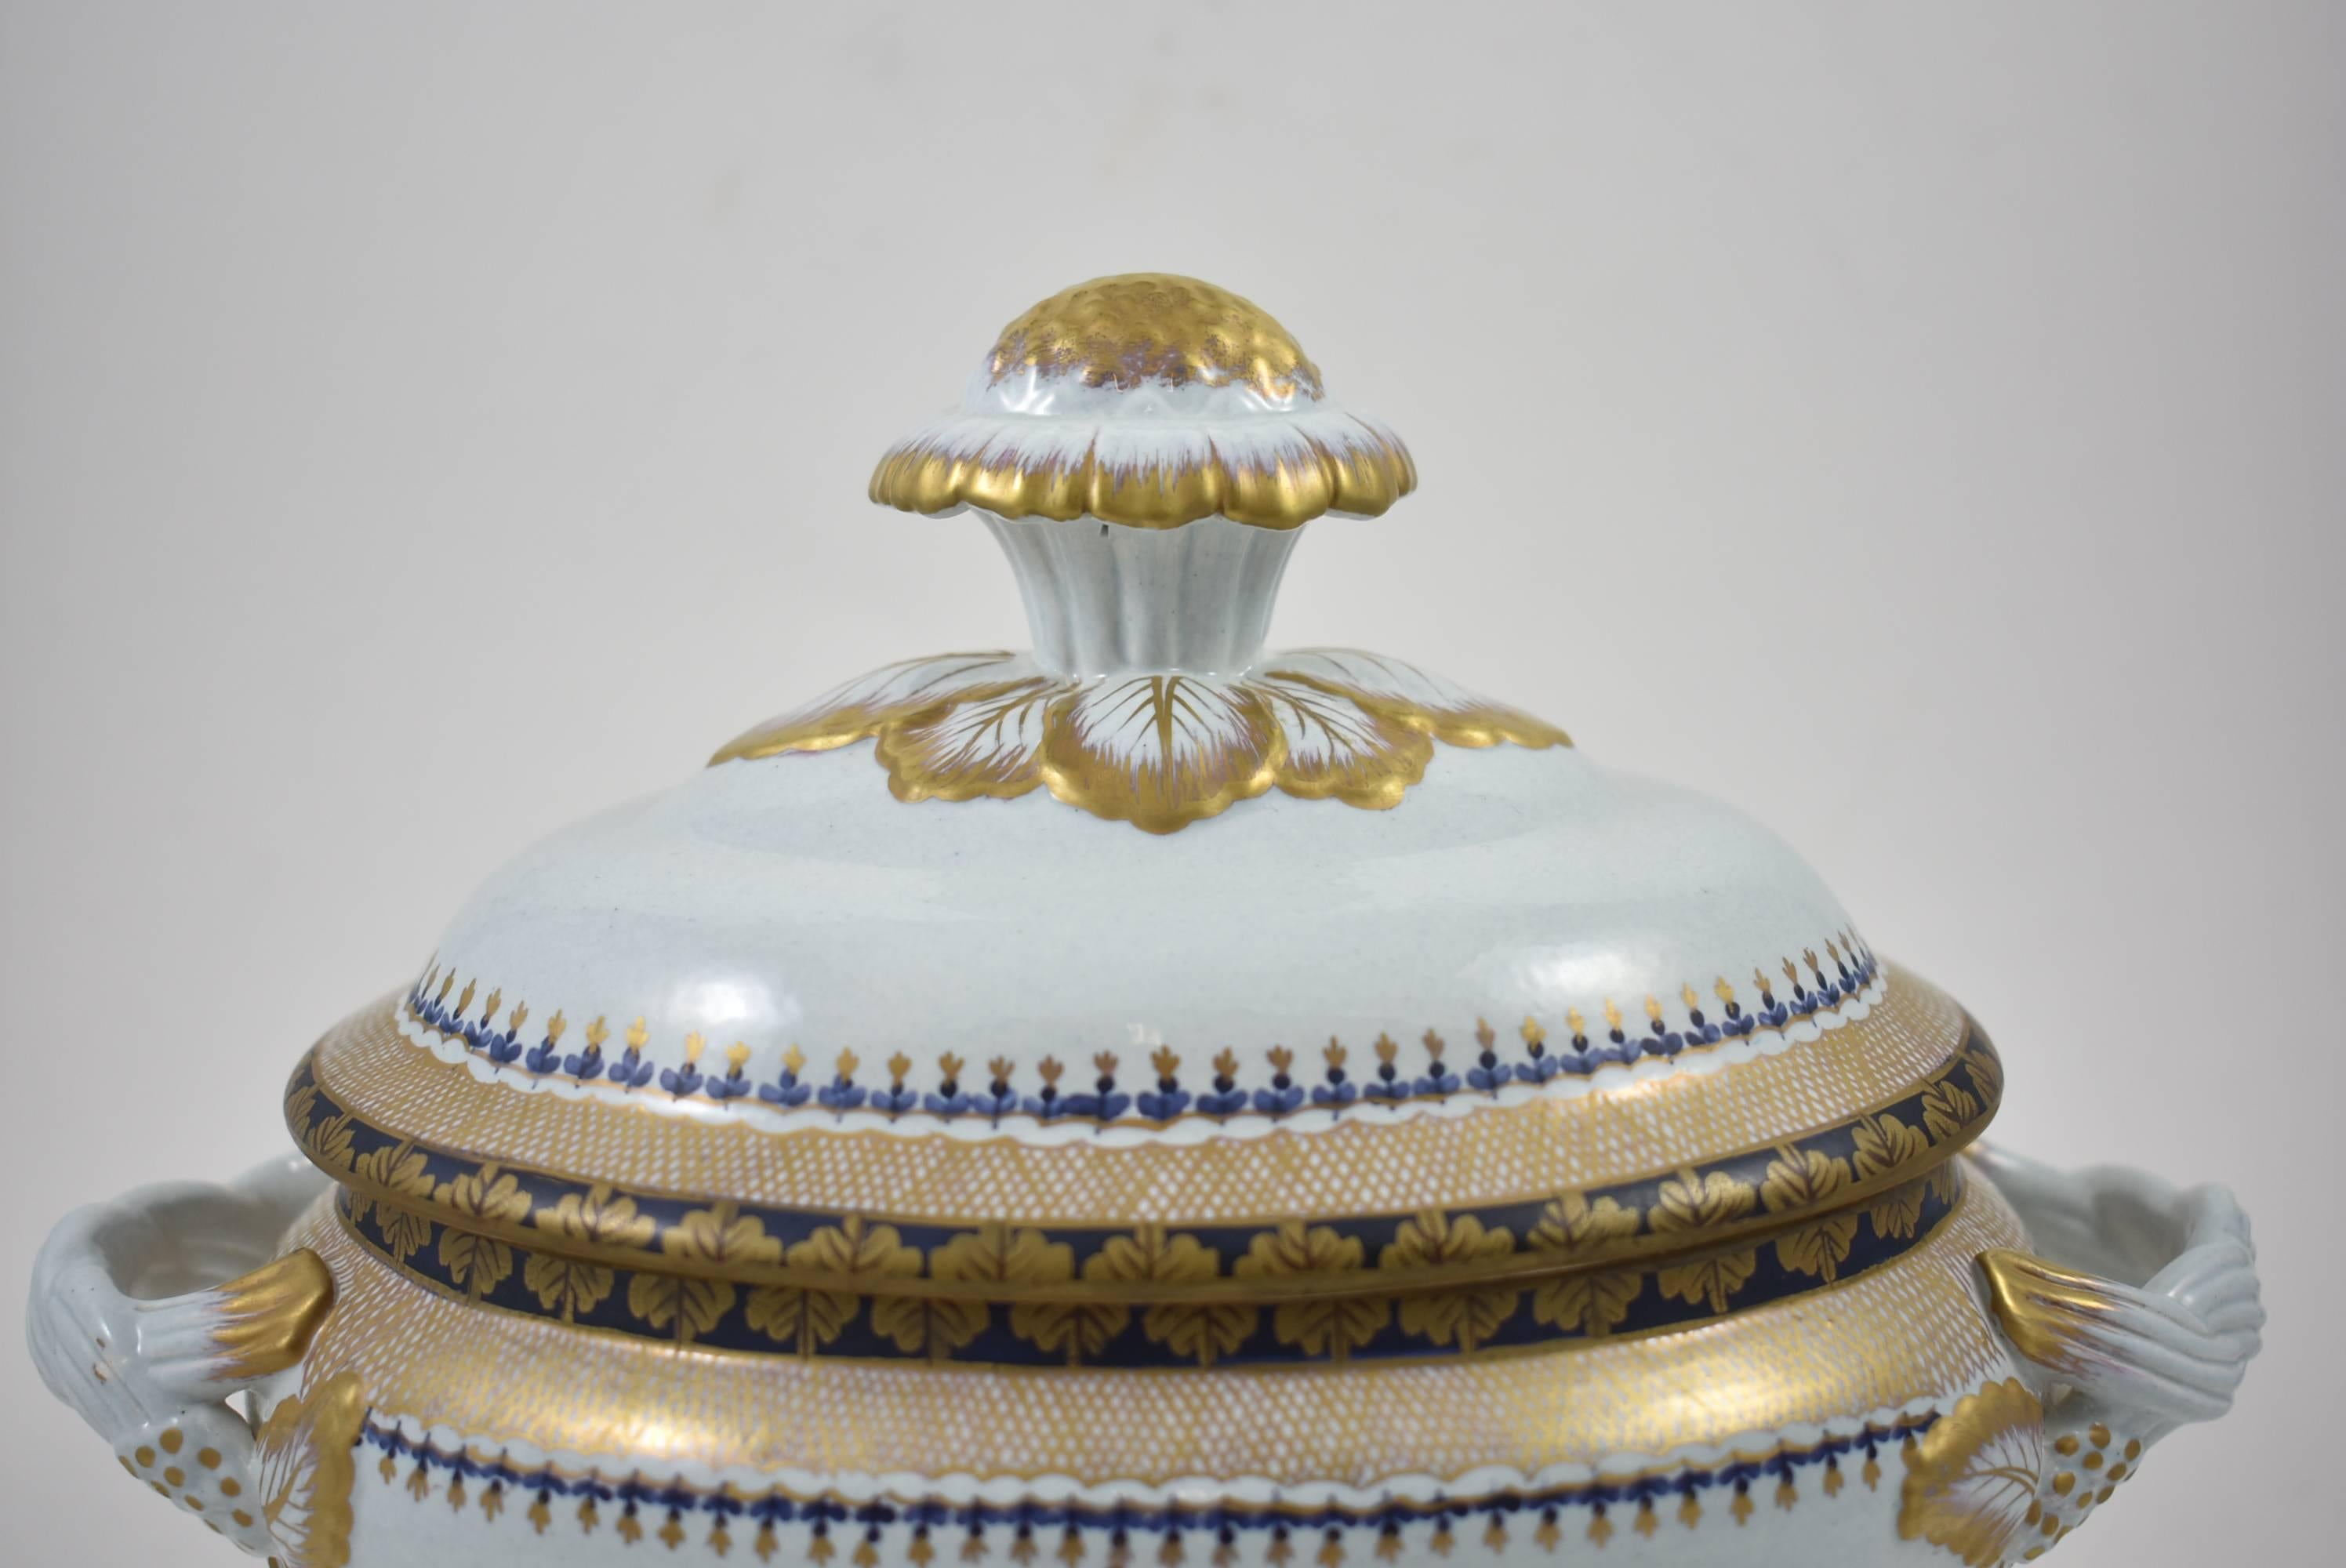 20th Century Italian Lowestoft Reproduction Created by Mottahedeh Porcelain Covered Tureen For Sale